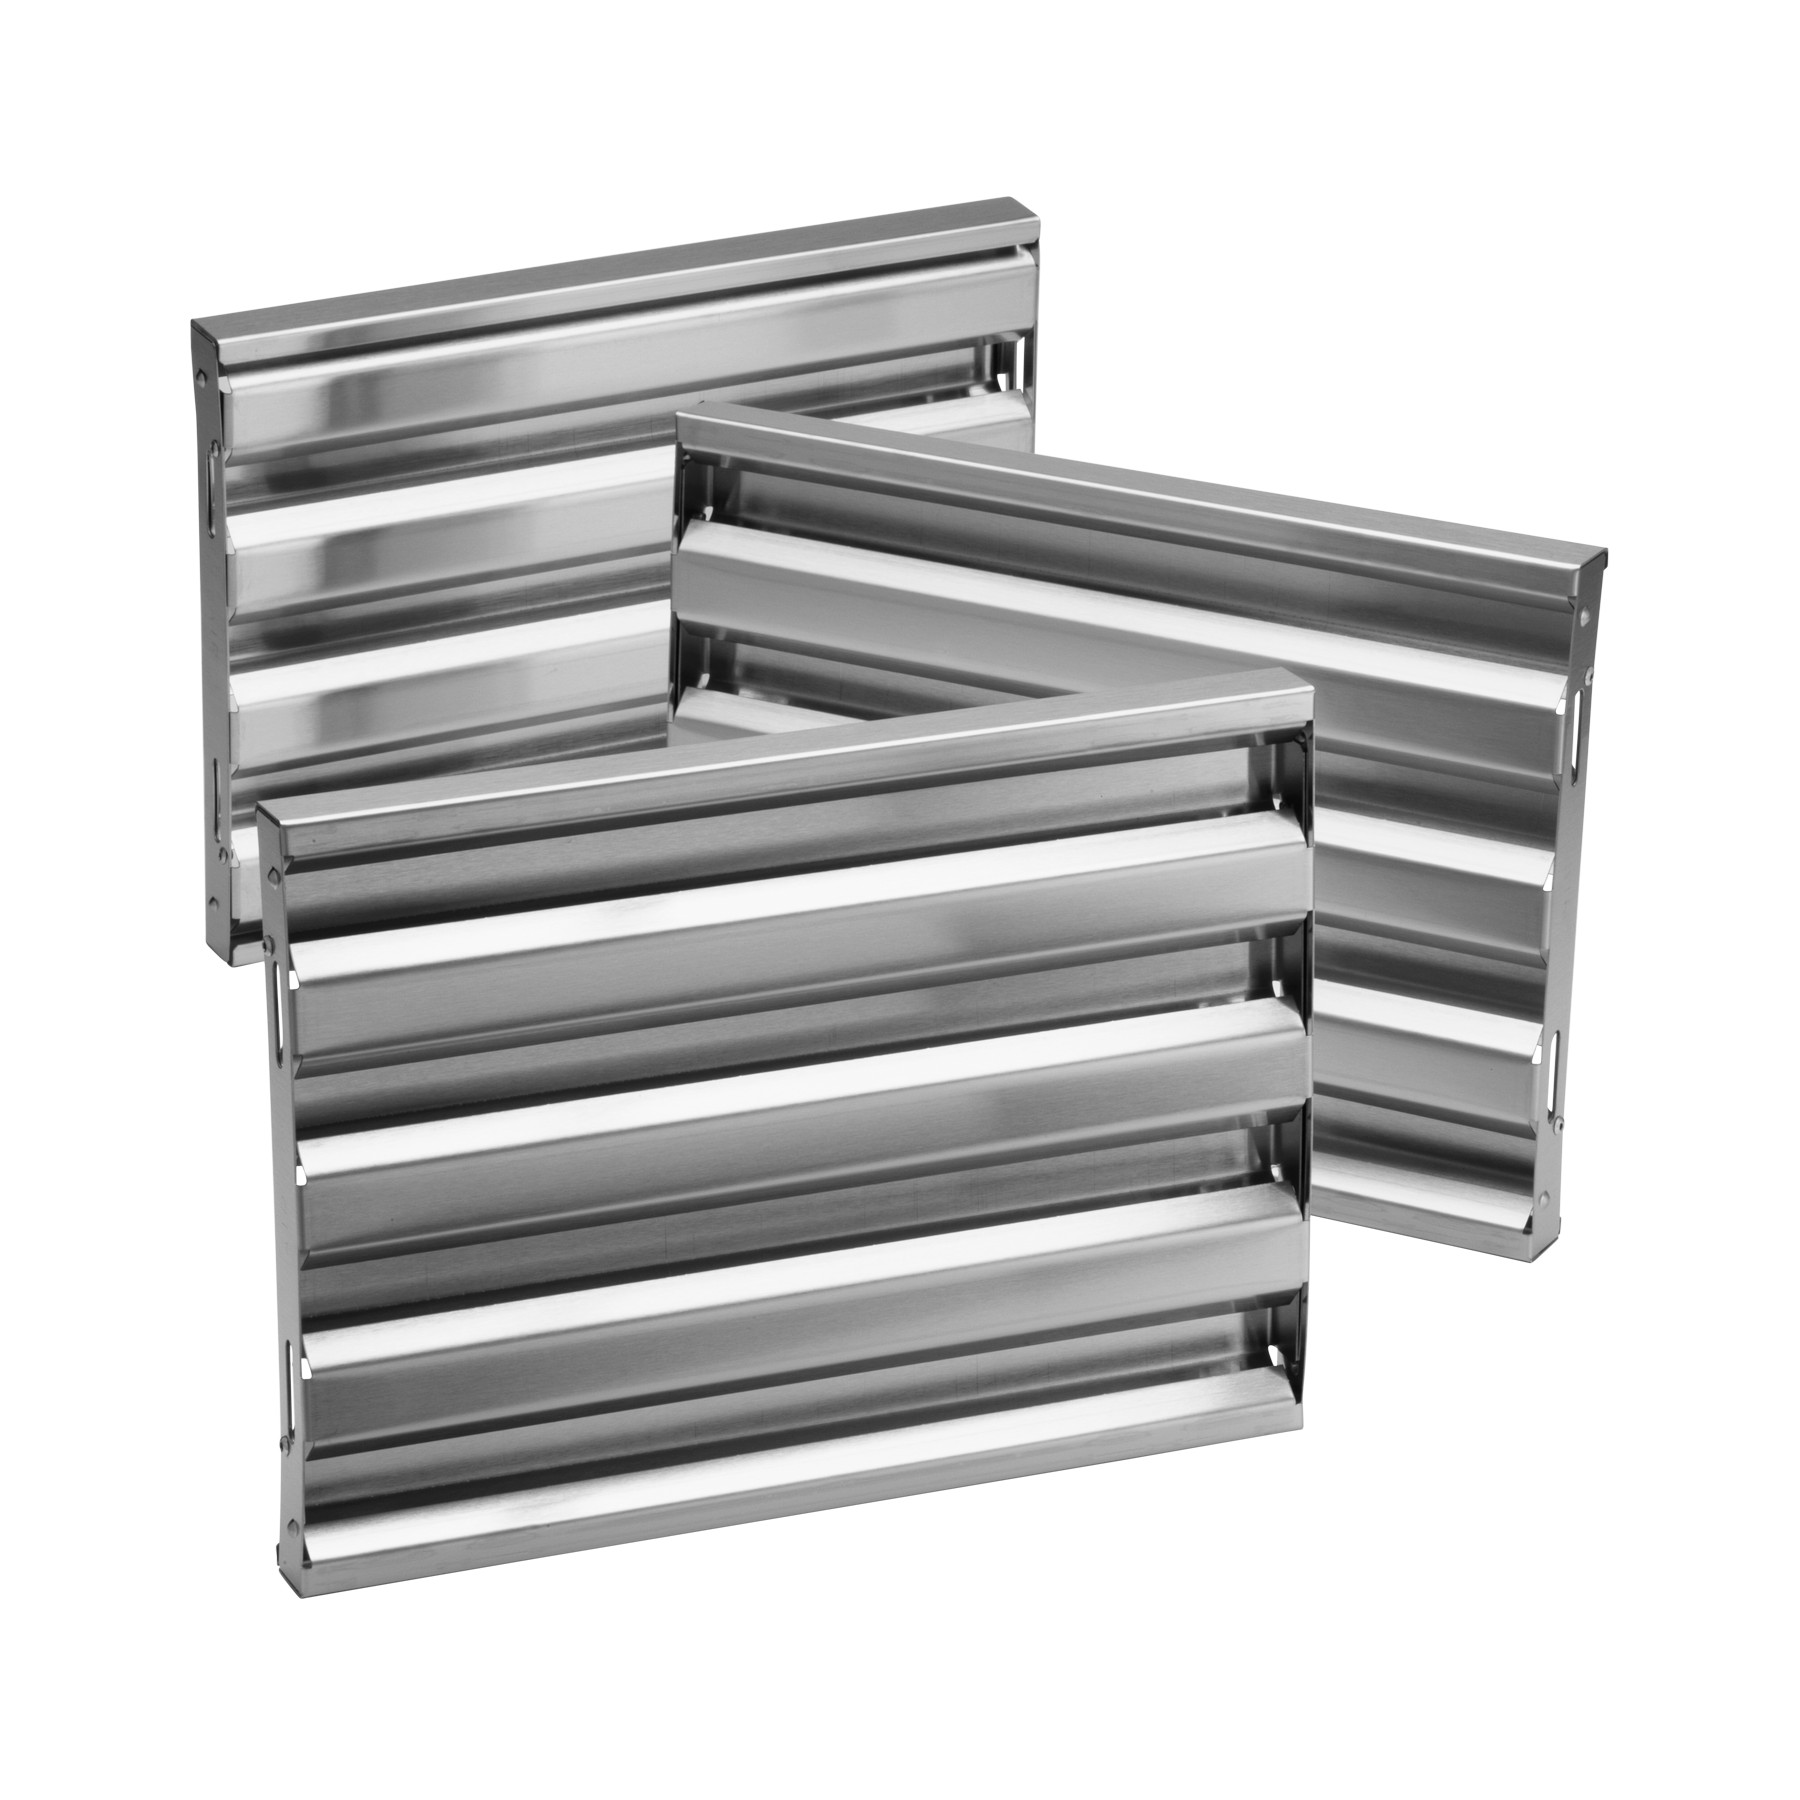 Optional Baffle Filter Kit for 33-Inch Pro-Style Insert, in Stainless Steel